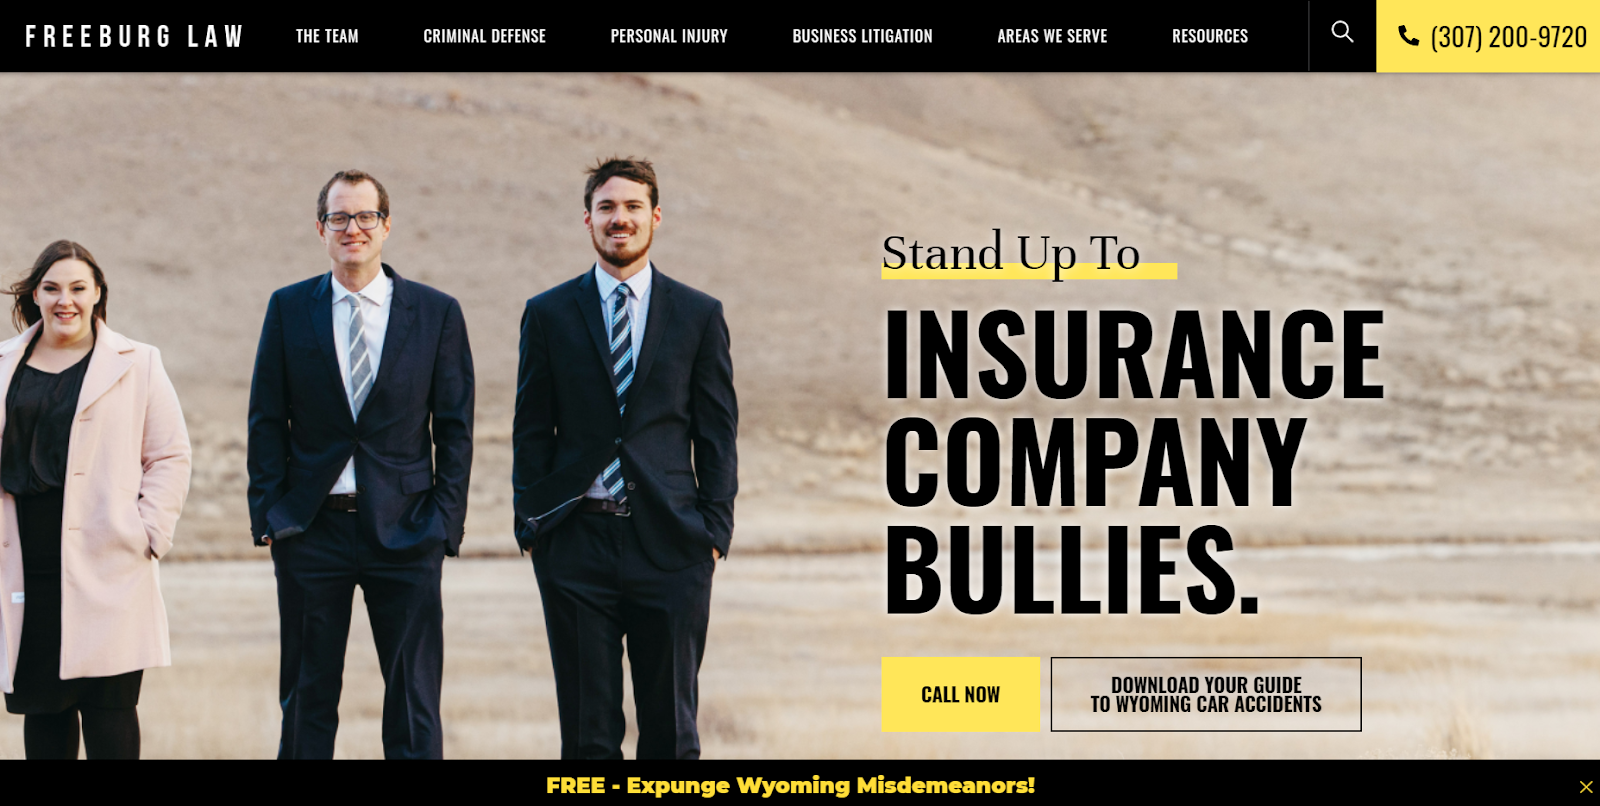 A website about a personal injury lawyer in Wyoming